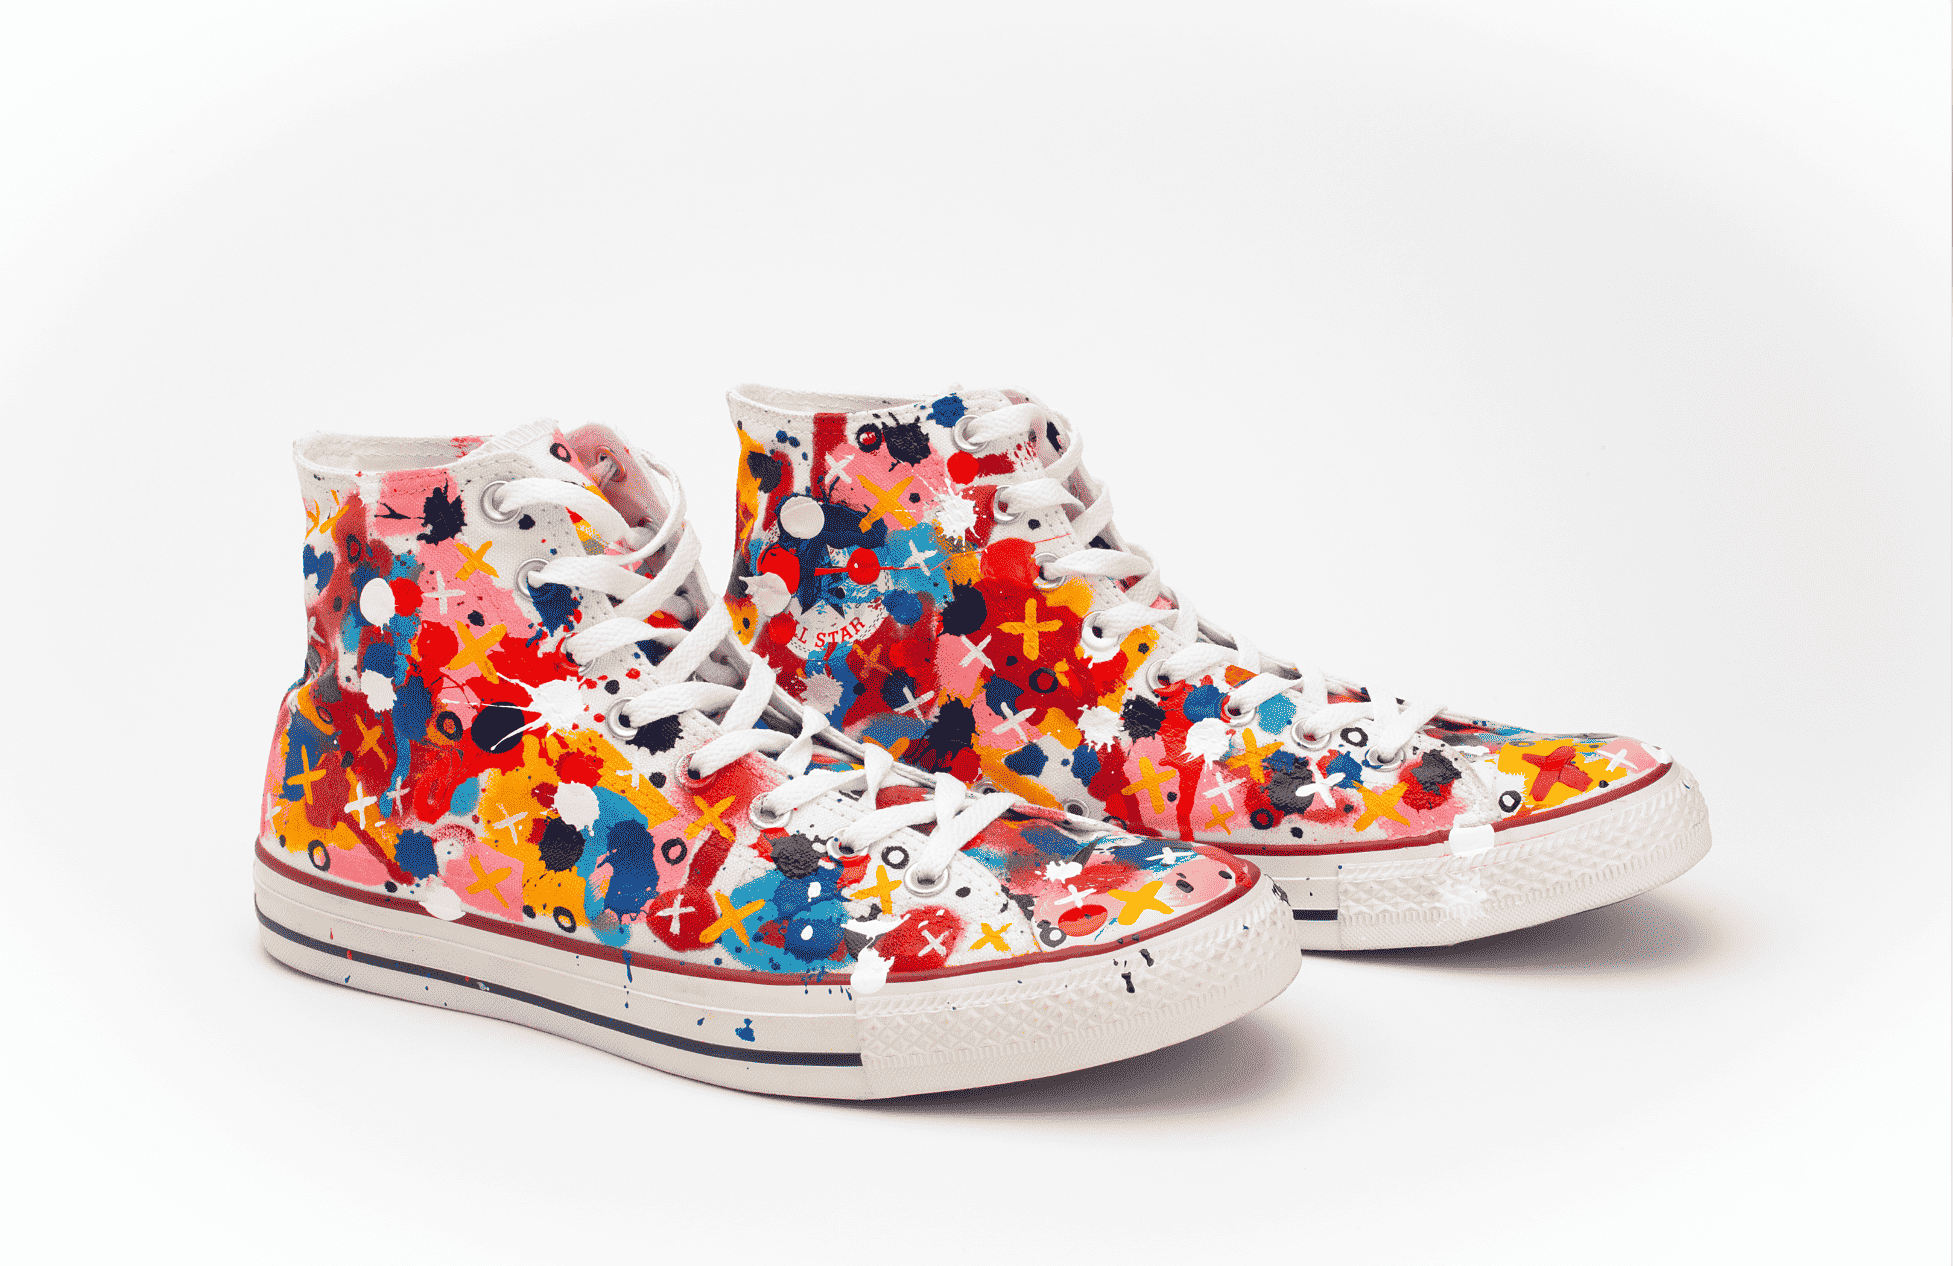 A pair of colorful shoes.